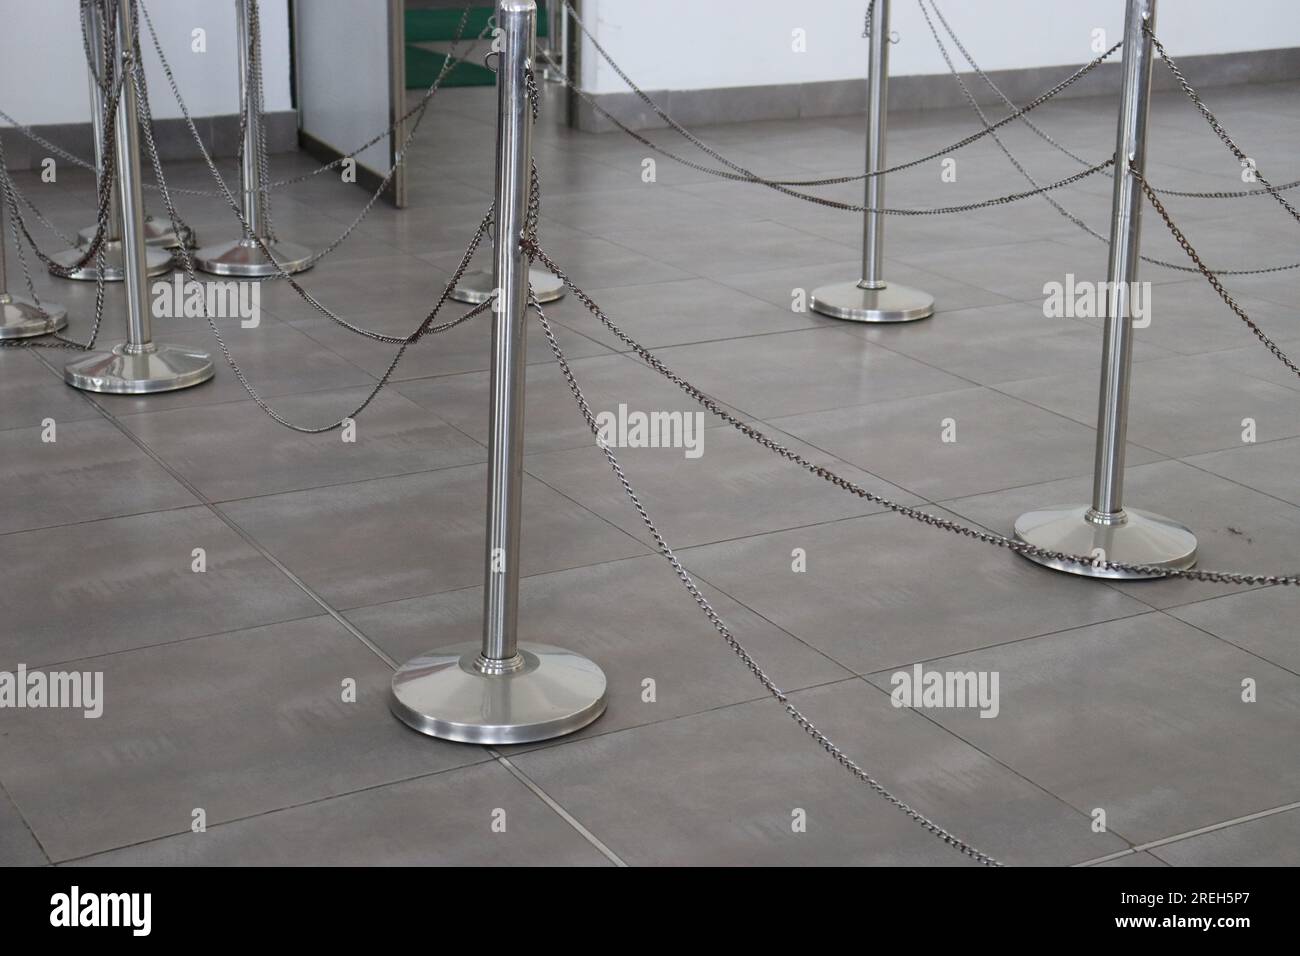 Stainless steel balusters with chain fencing, metal fence barricade, chain railing used to control the crowd Stock Photo